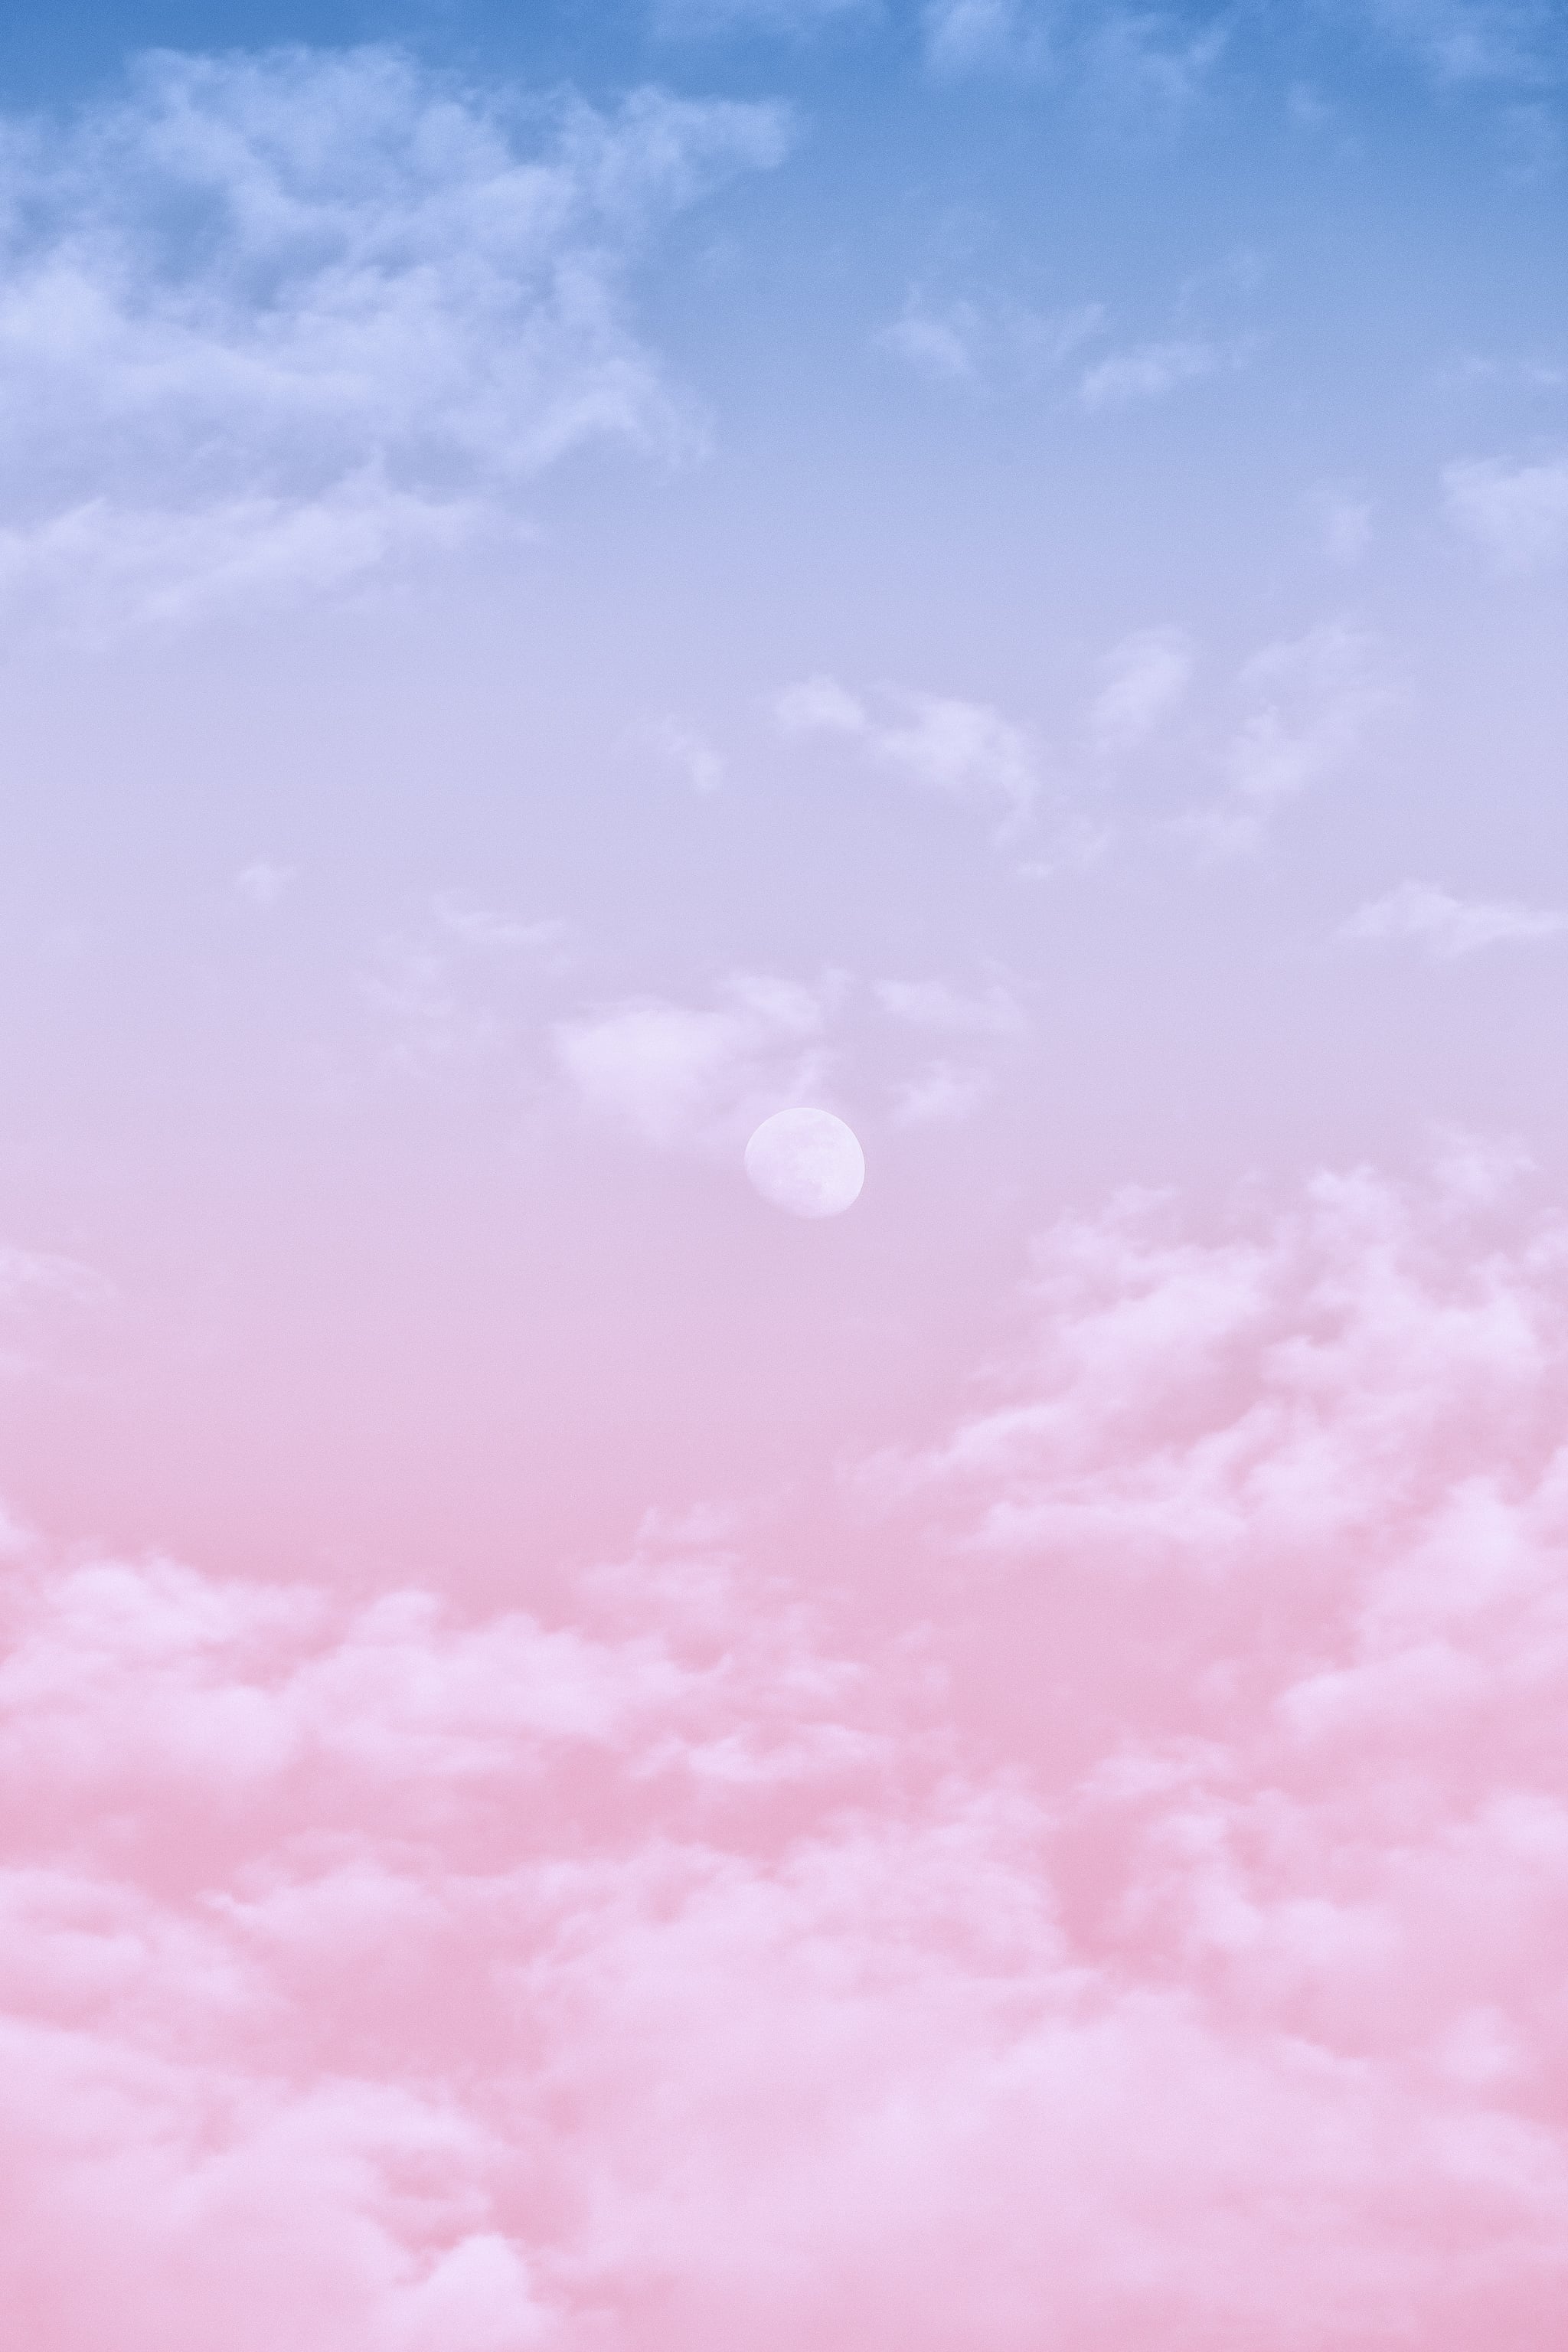 Pastel Aesthetic City iPhone Wallpapers on WallpaperDog